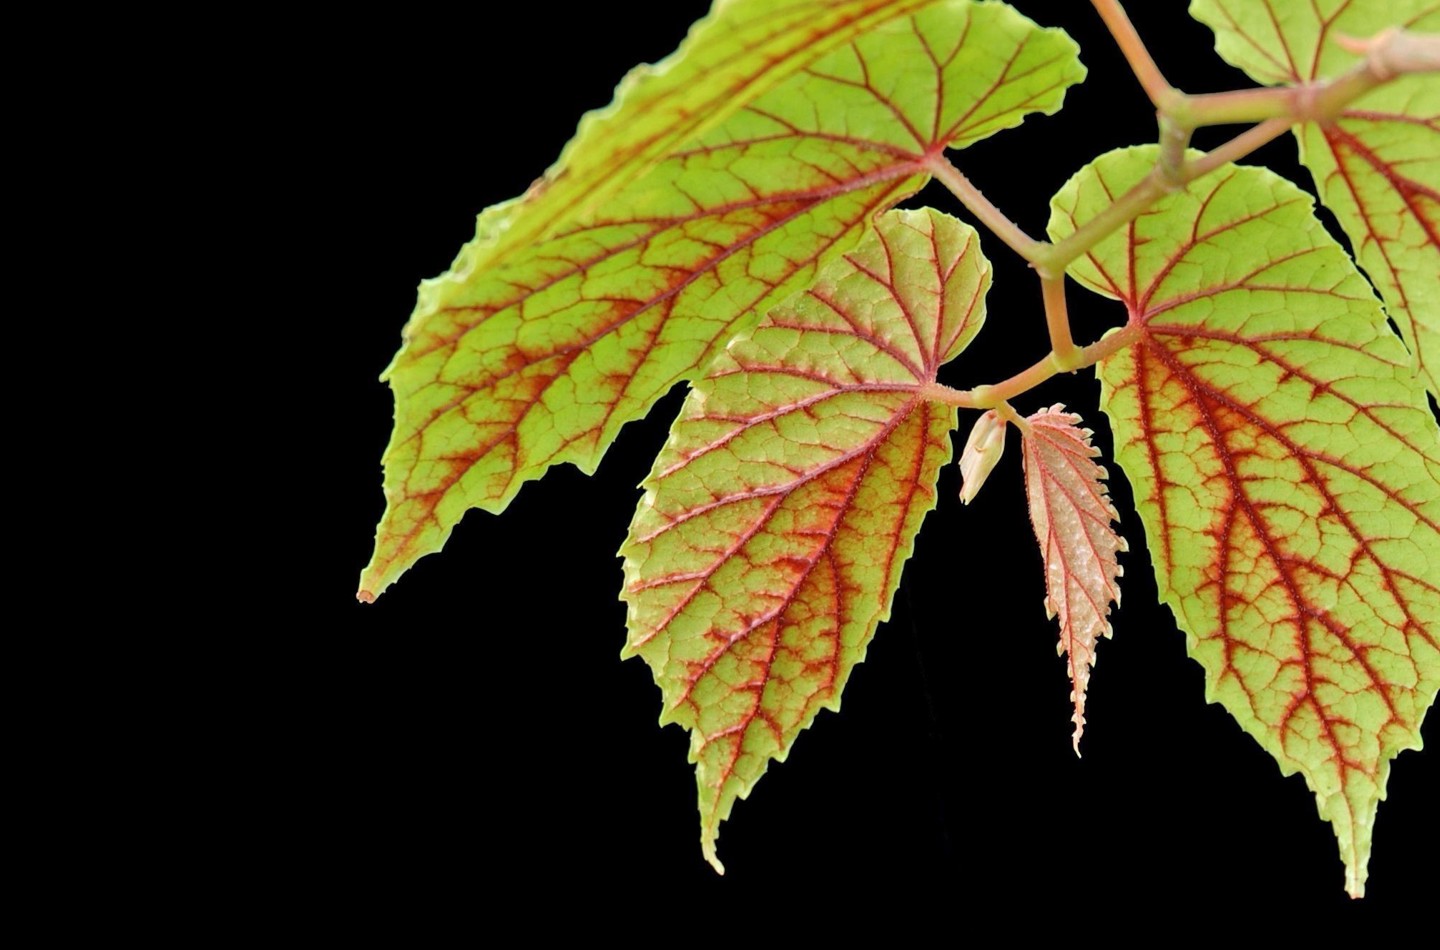 Begonia cumingii, a delicate Begonia with pale green leaves and bright red venation on a black background